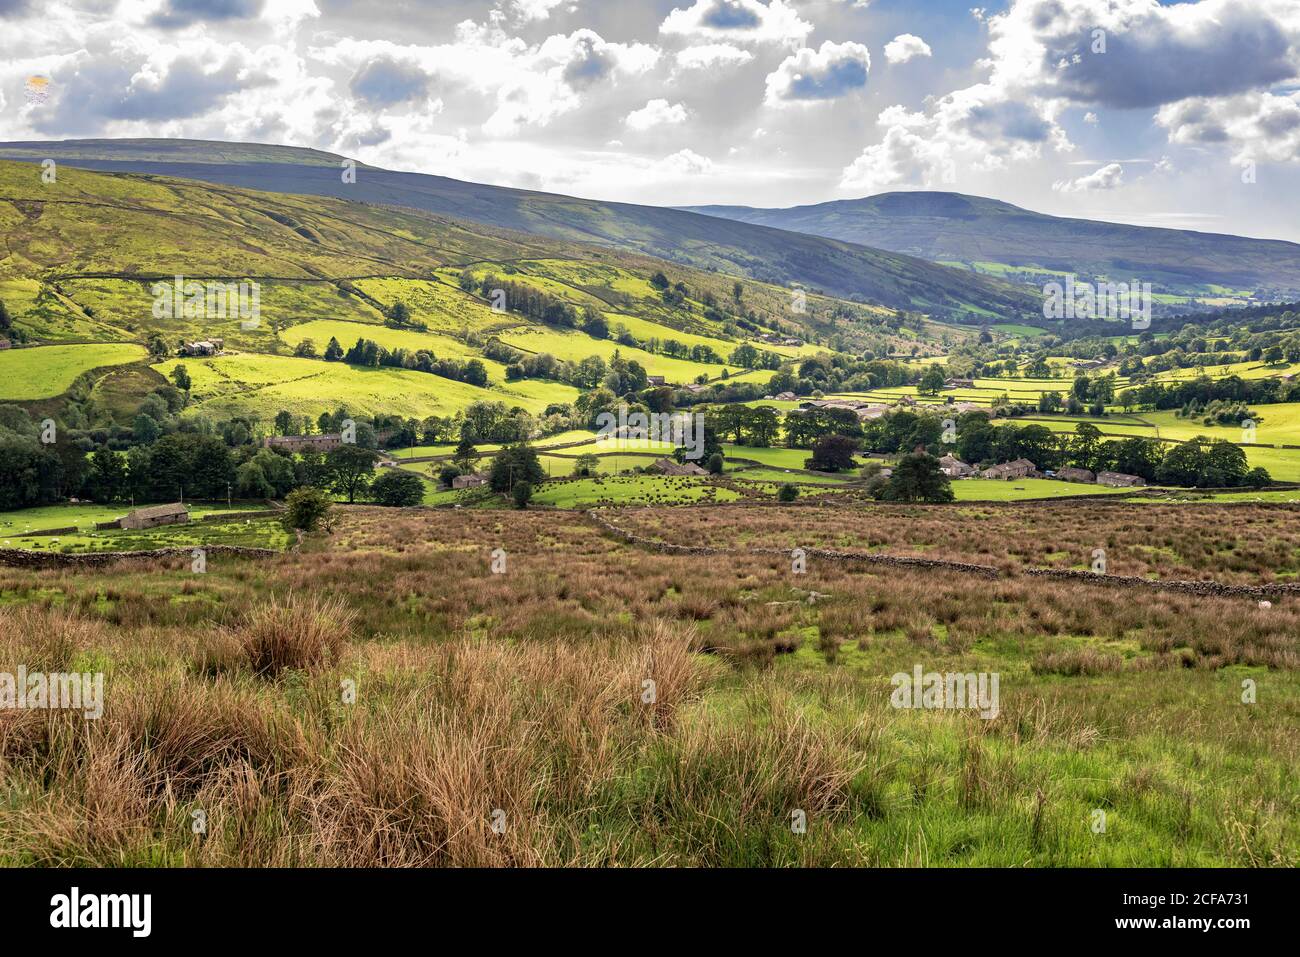 The village of Cowgill looking towards How Gill Moss in the Lancashre hills near Sedburgh. Stock Photo